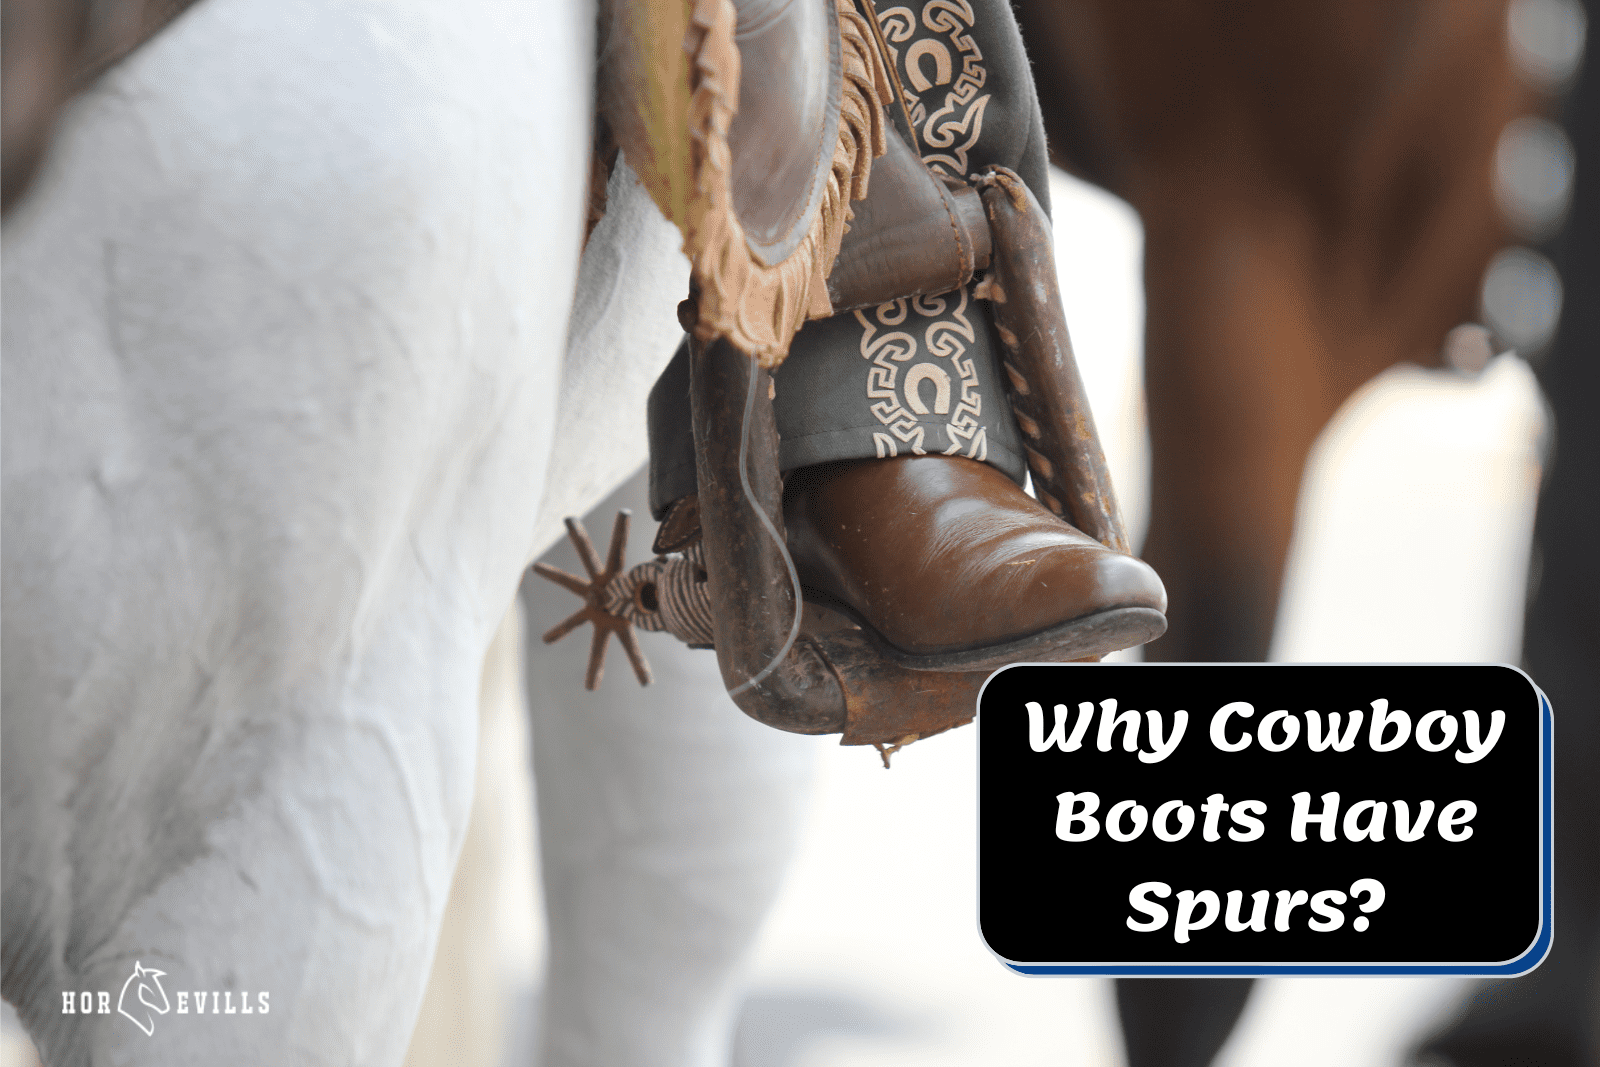 horse rider wearing cowboy boots with spurs but Why Cowboy Boots Have Spurs?